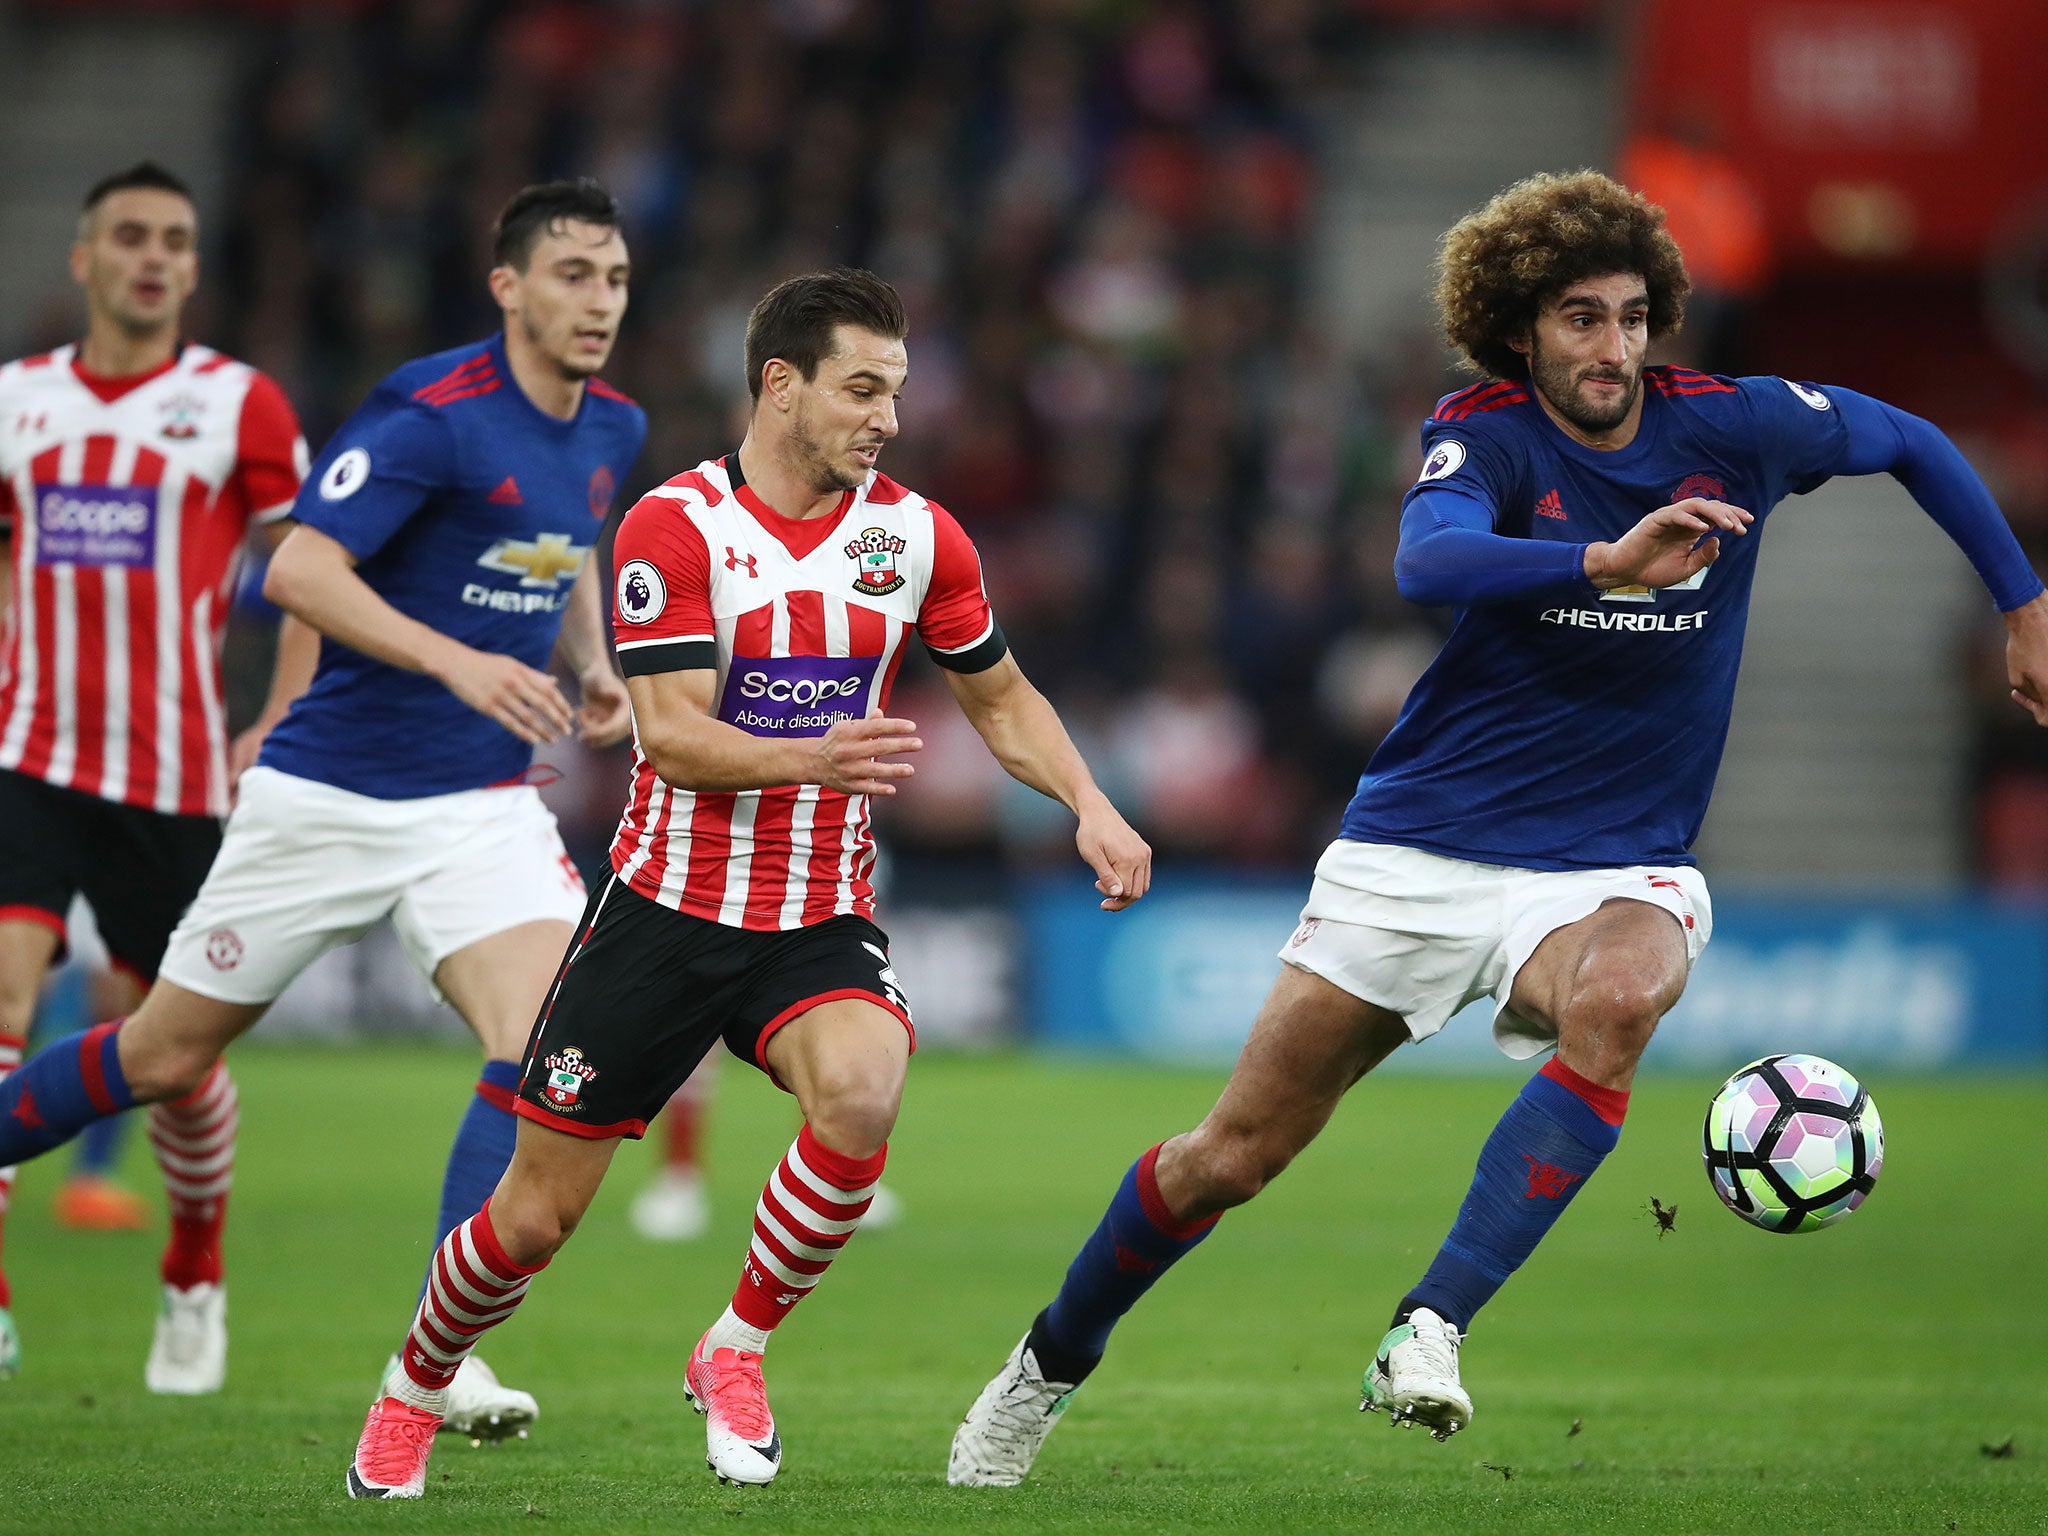 Southampton and United go head to head at St Mary's